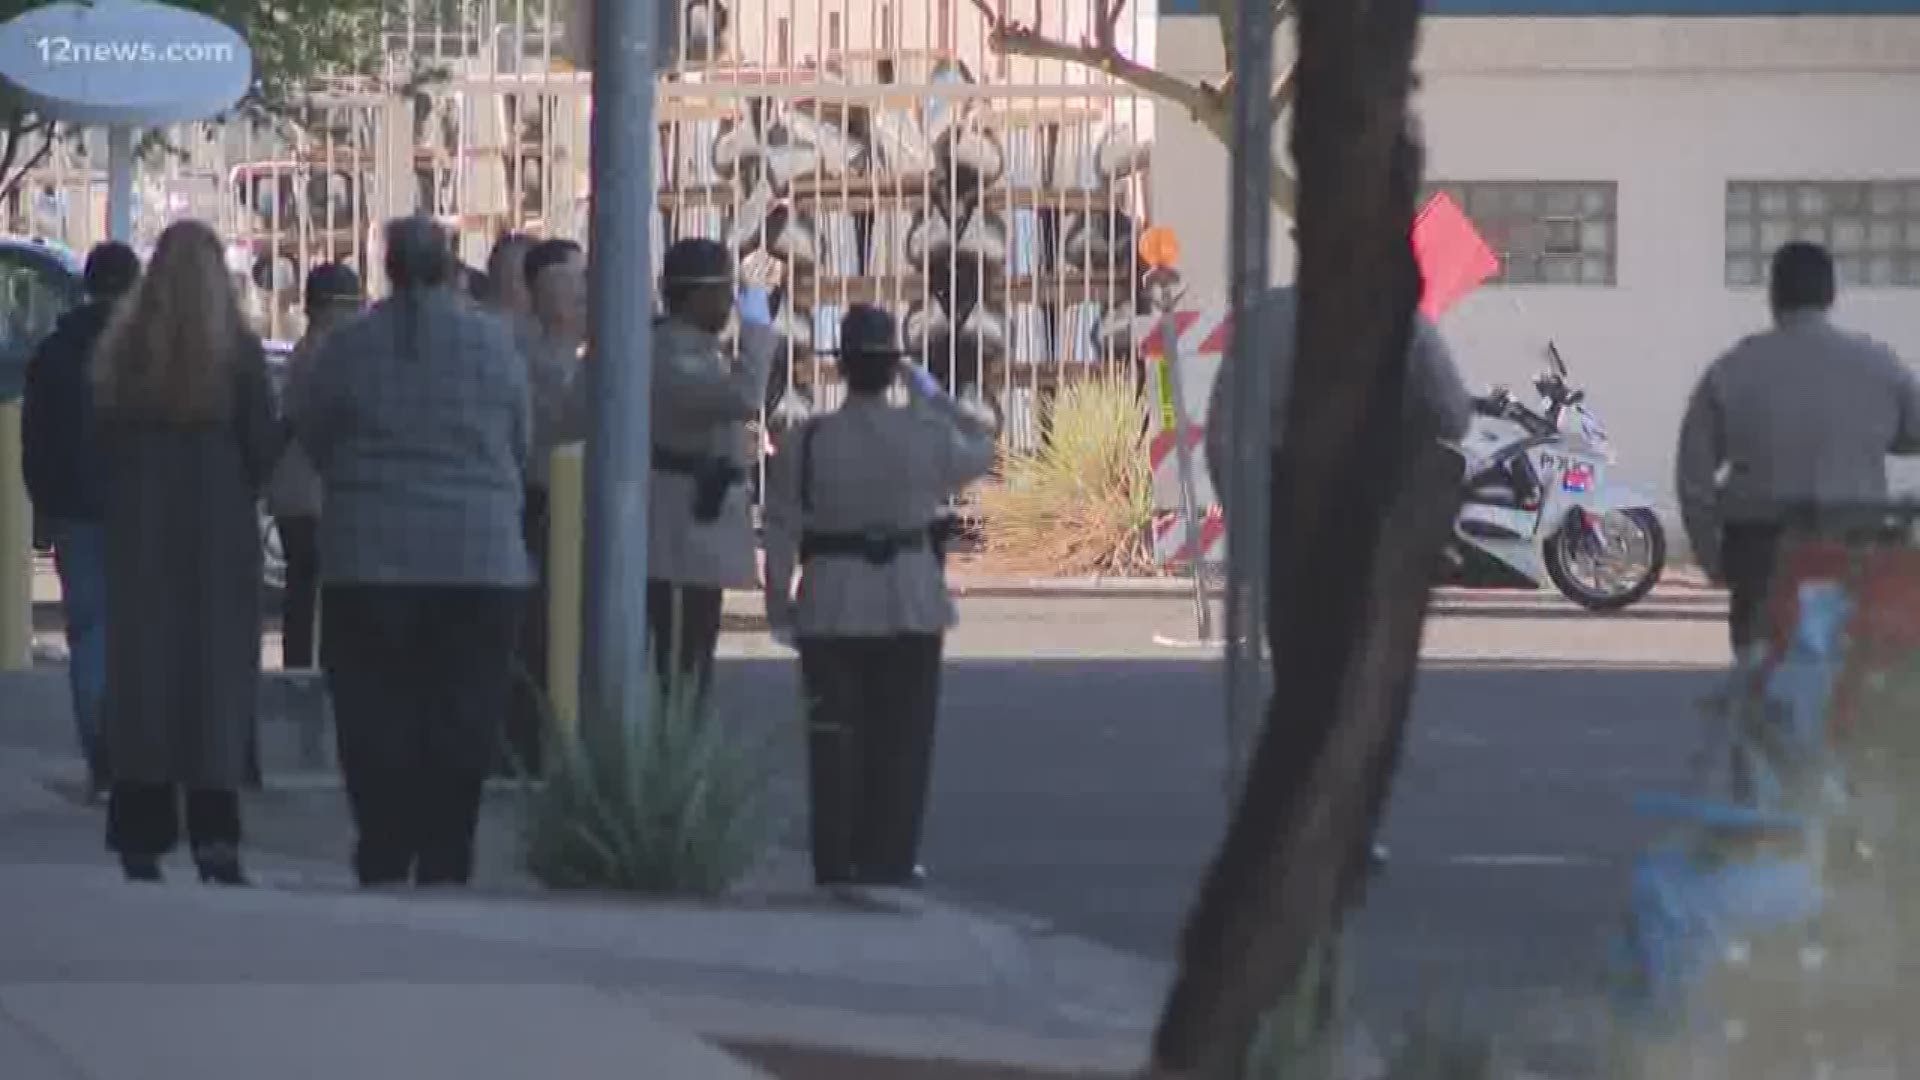 The procession for Officer Gene Lee, who died after he was attacked by an inmate, was held in Phoenix on Saturday. Team 12's Colleen Sikora has the latest.